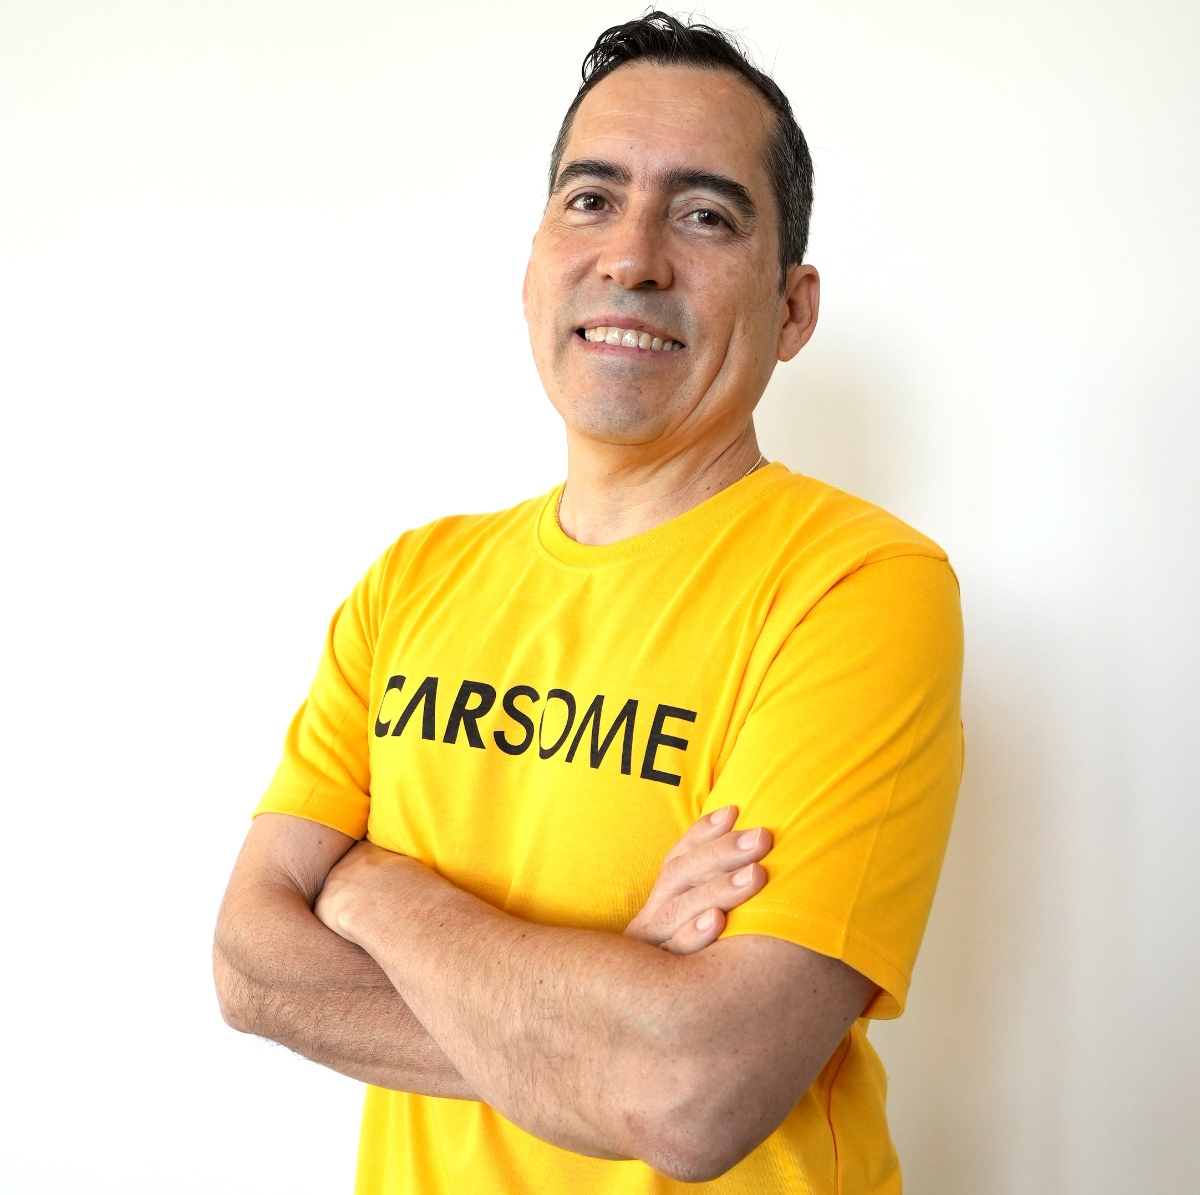 Carsome announces the appointment of Miguel Fernandez as its CFO